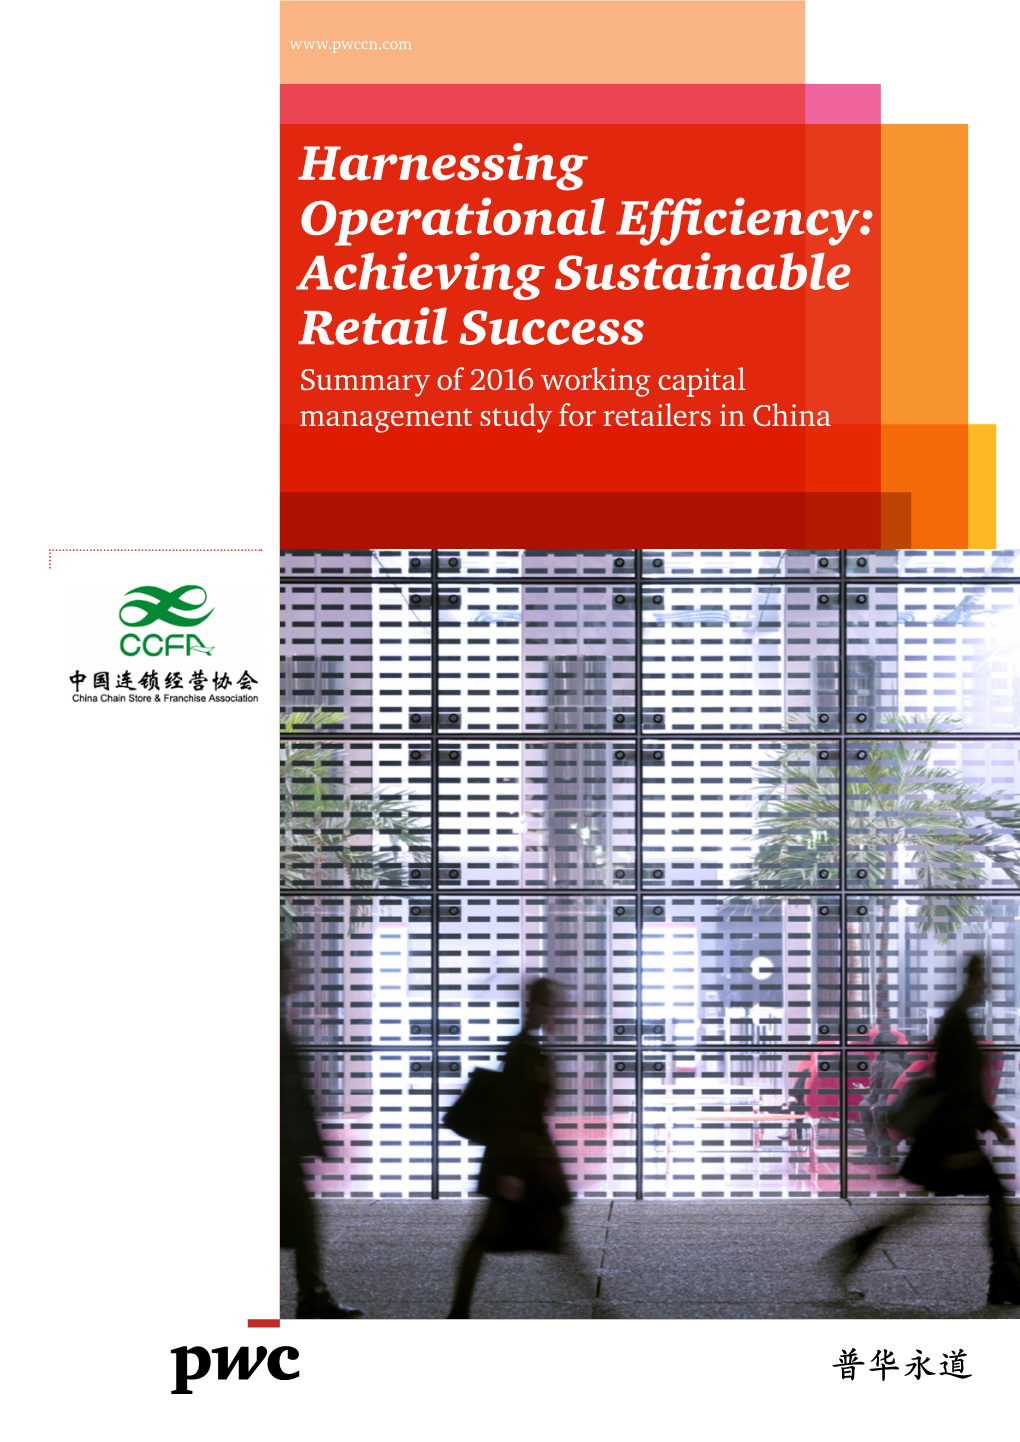 Harnessing Operational Efficiency: Achieving Sustainable Retail Success Summary of 2016 Working Capital Management Study for Retailers in China Acknowledgment